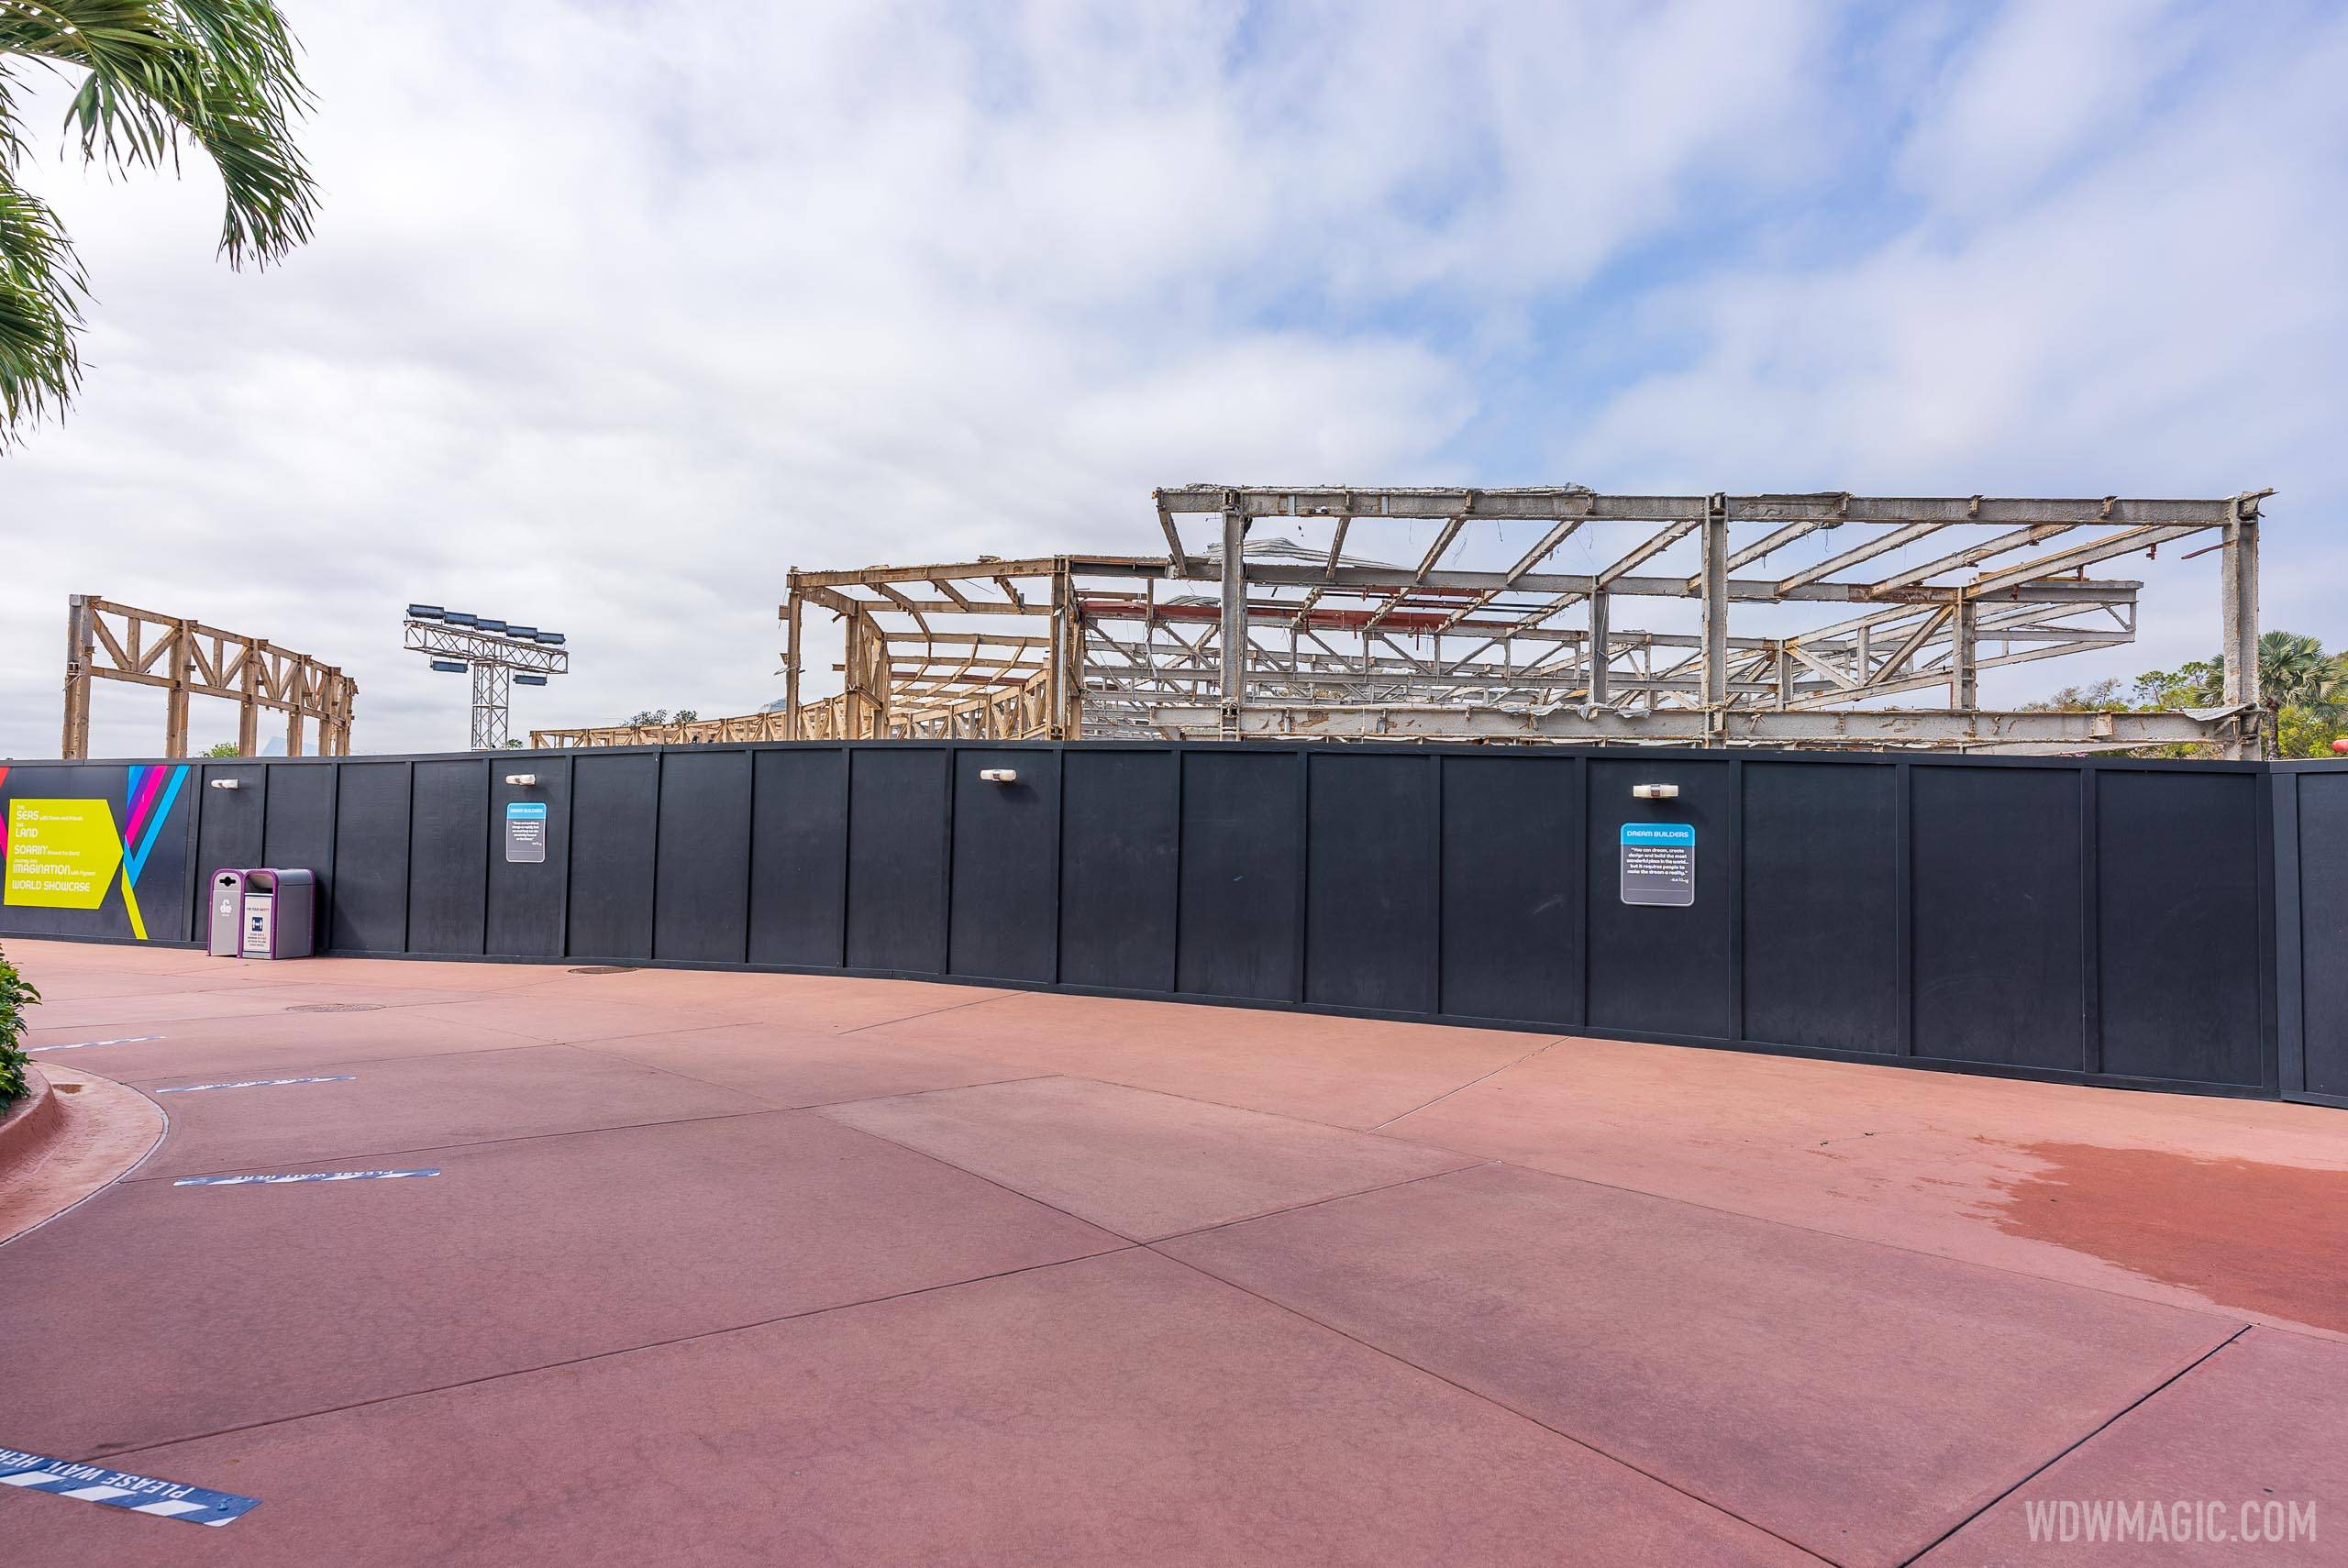 PHOTOS - Innoventions West demolition nearing completion at EPCOT